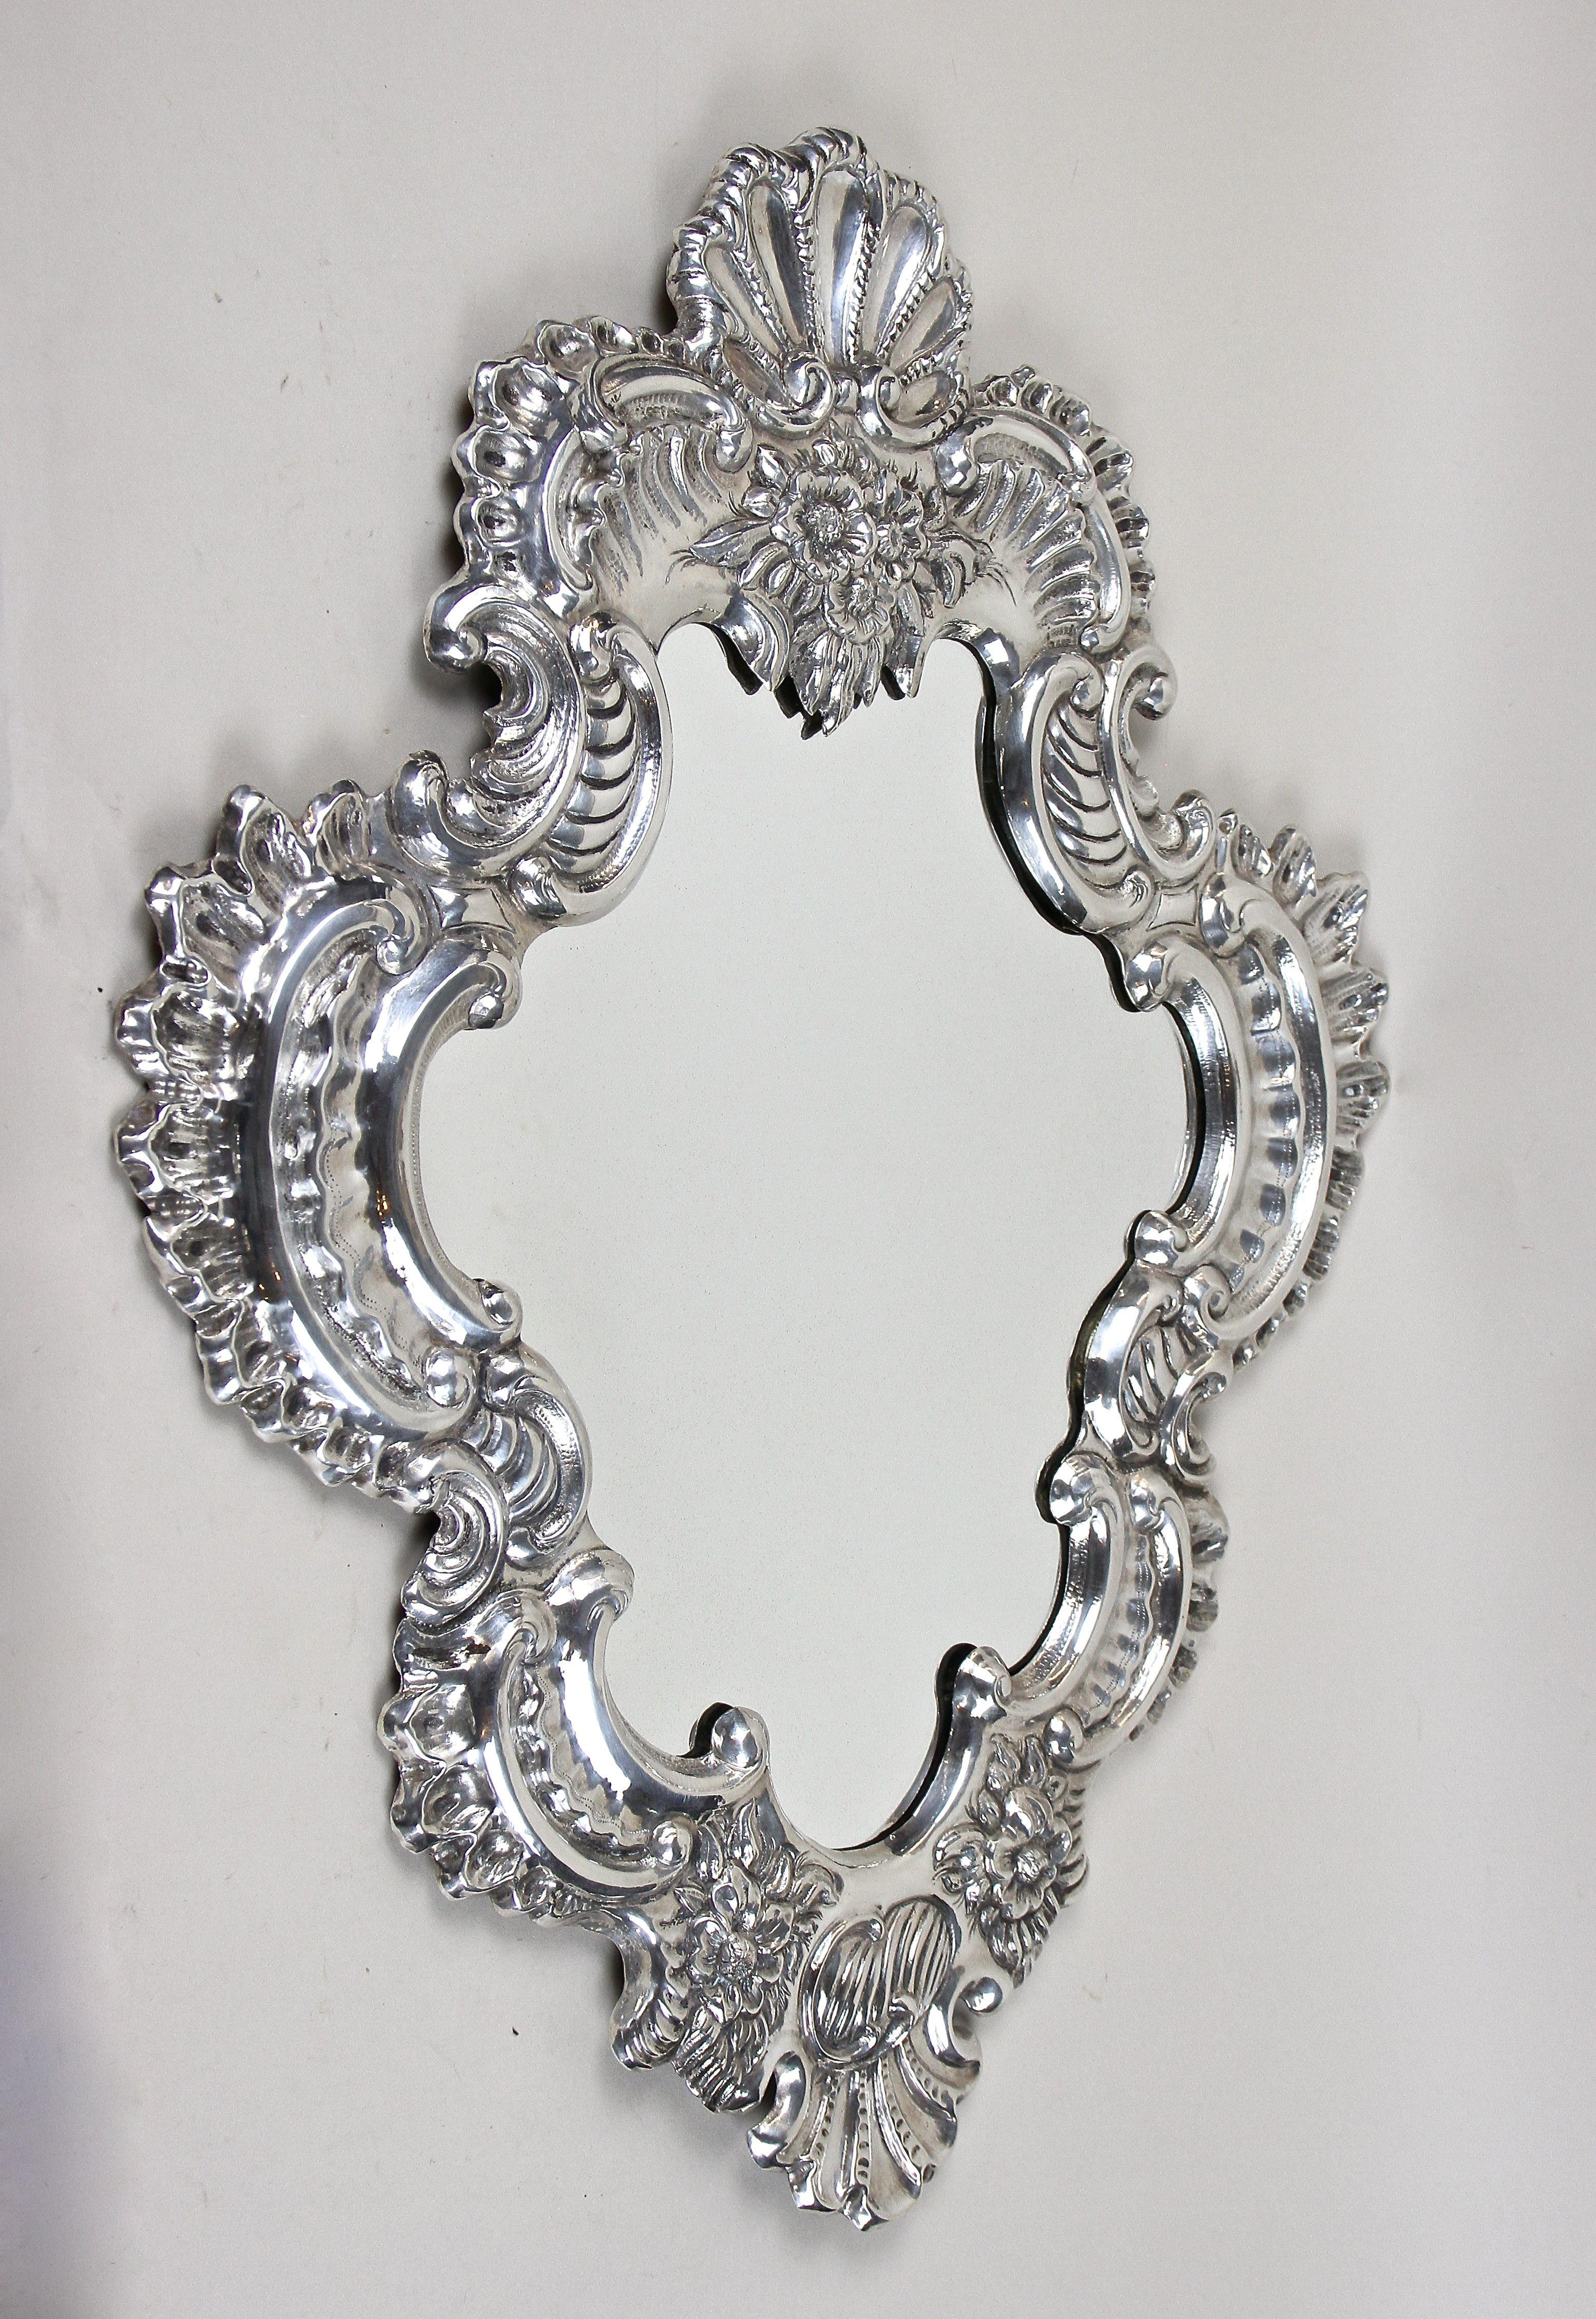 Exceptional late 19th century silvered Italian wall mirror from the island of Venetia around 1890. This elaborately made mirror impresses with an absolute artfully shaped frame made of beautifully silvered copper. Showing outstanding looking,